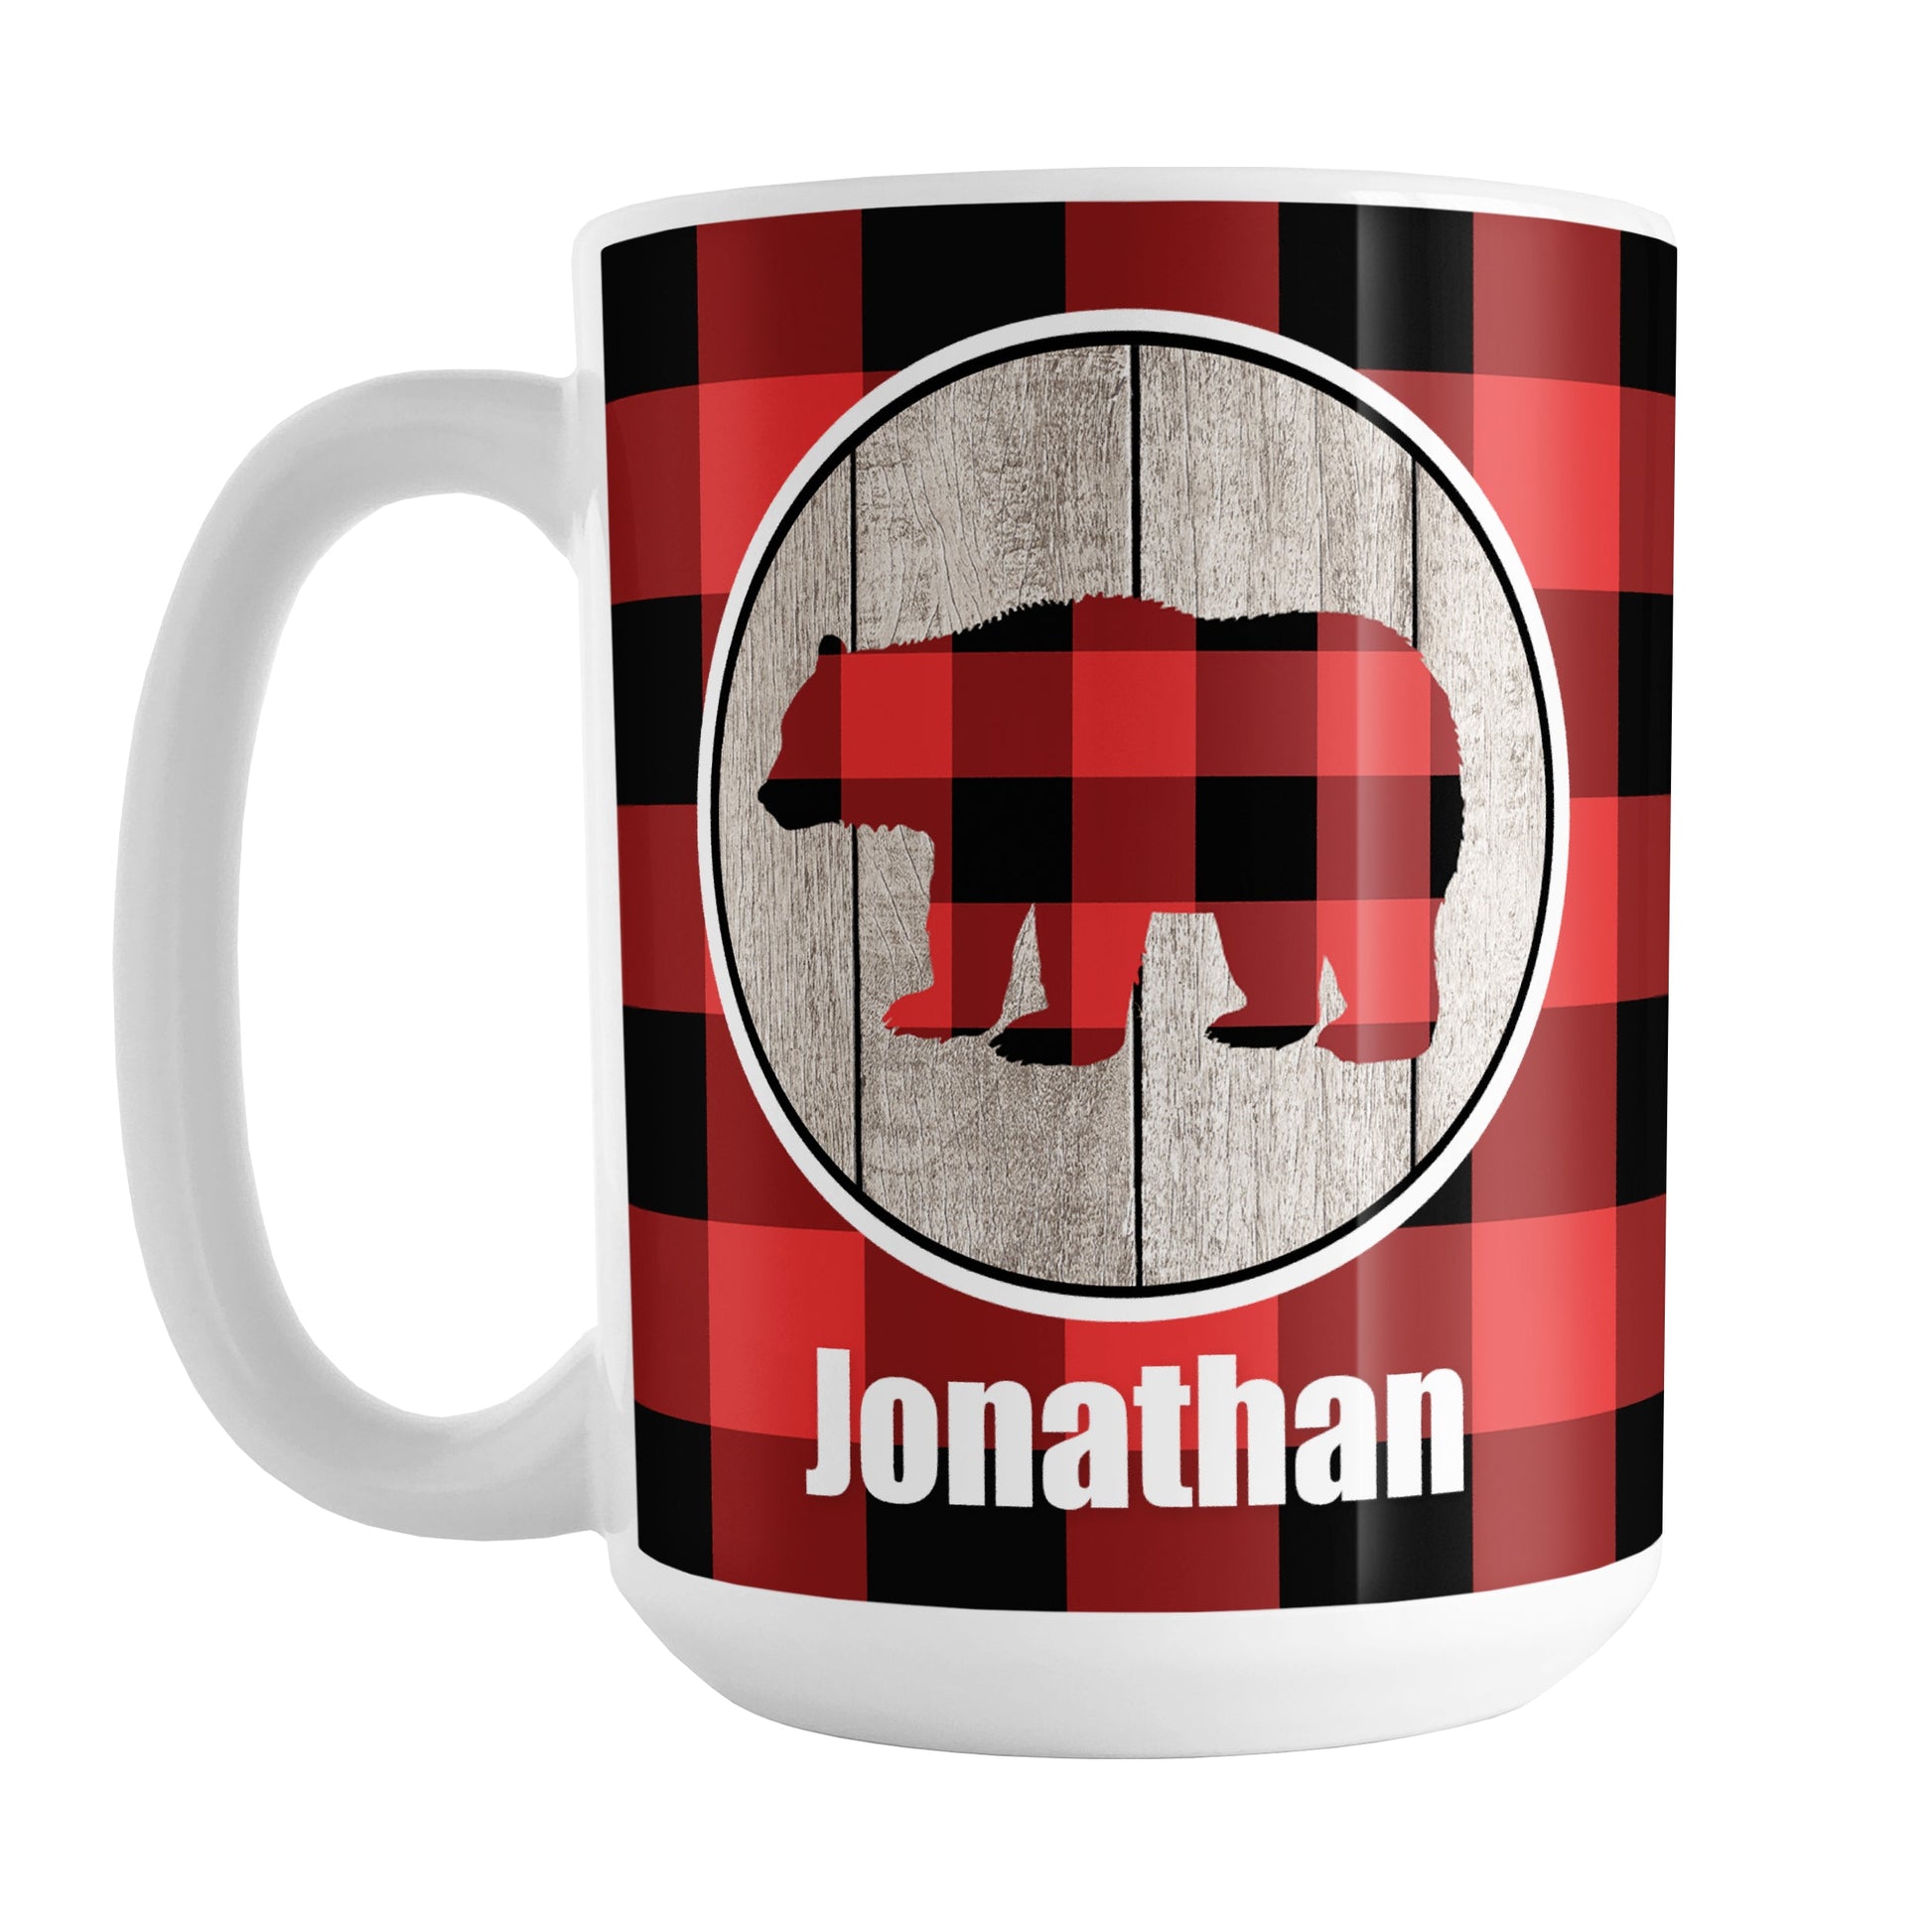 Personalized Rustic Red Buffalo Plaid Bear Mug (15oz) at Amy's Coffee Mugs. A ceramic coffee mug designed with a red and black buffalo plaid bear inside a rustic wood circle on both sides of the mug over a red and black buffalo plaid pattern that wraps around the mug to the handle. Your name is custom printed in white below the bear.